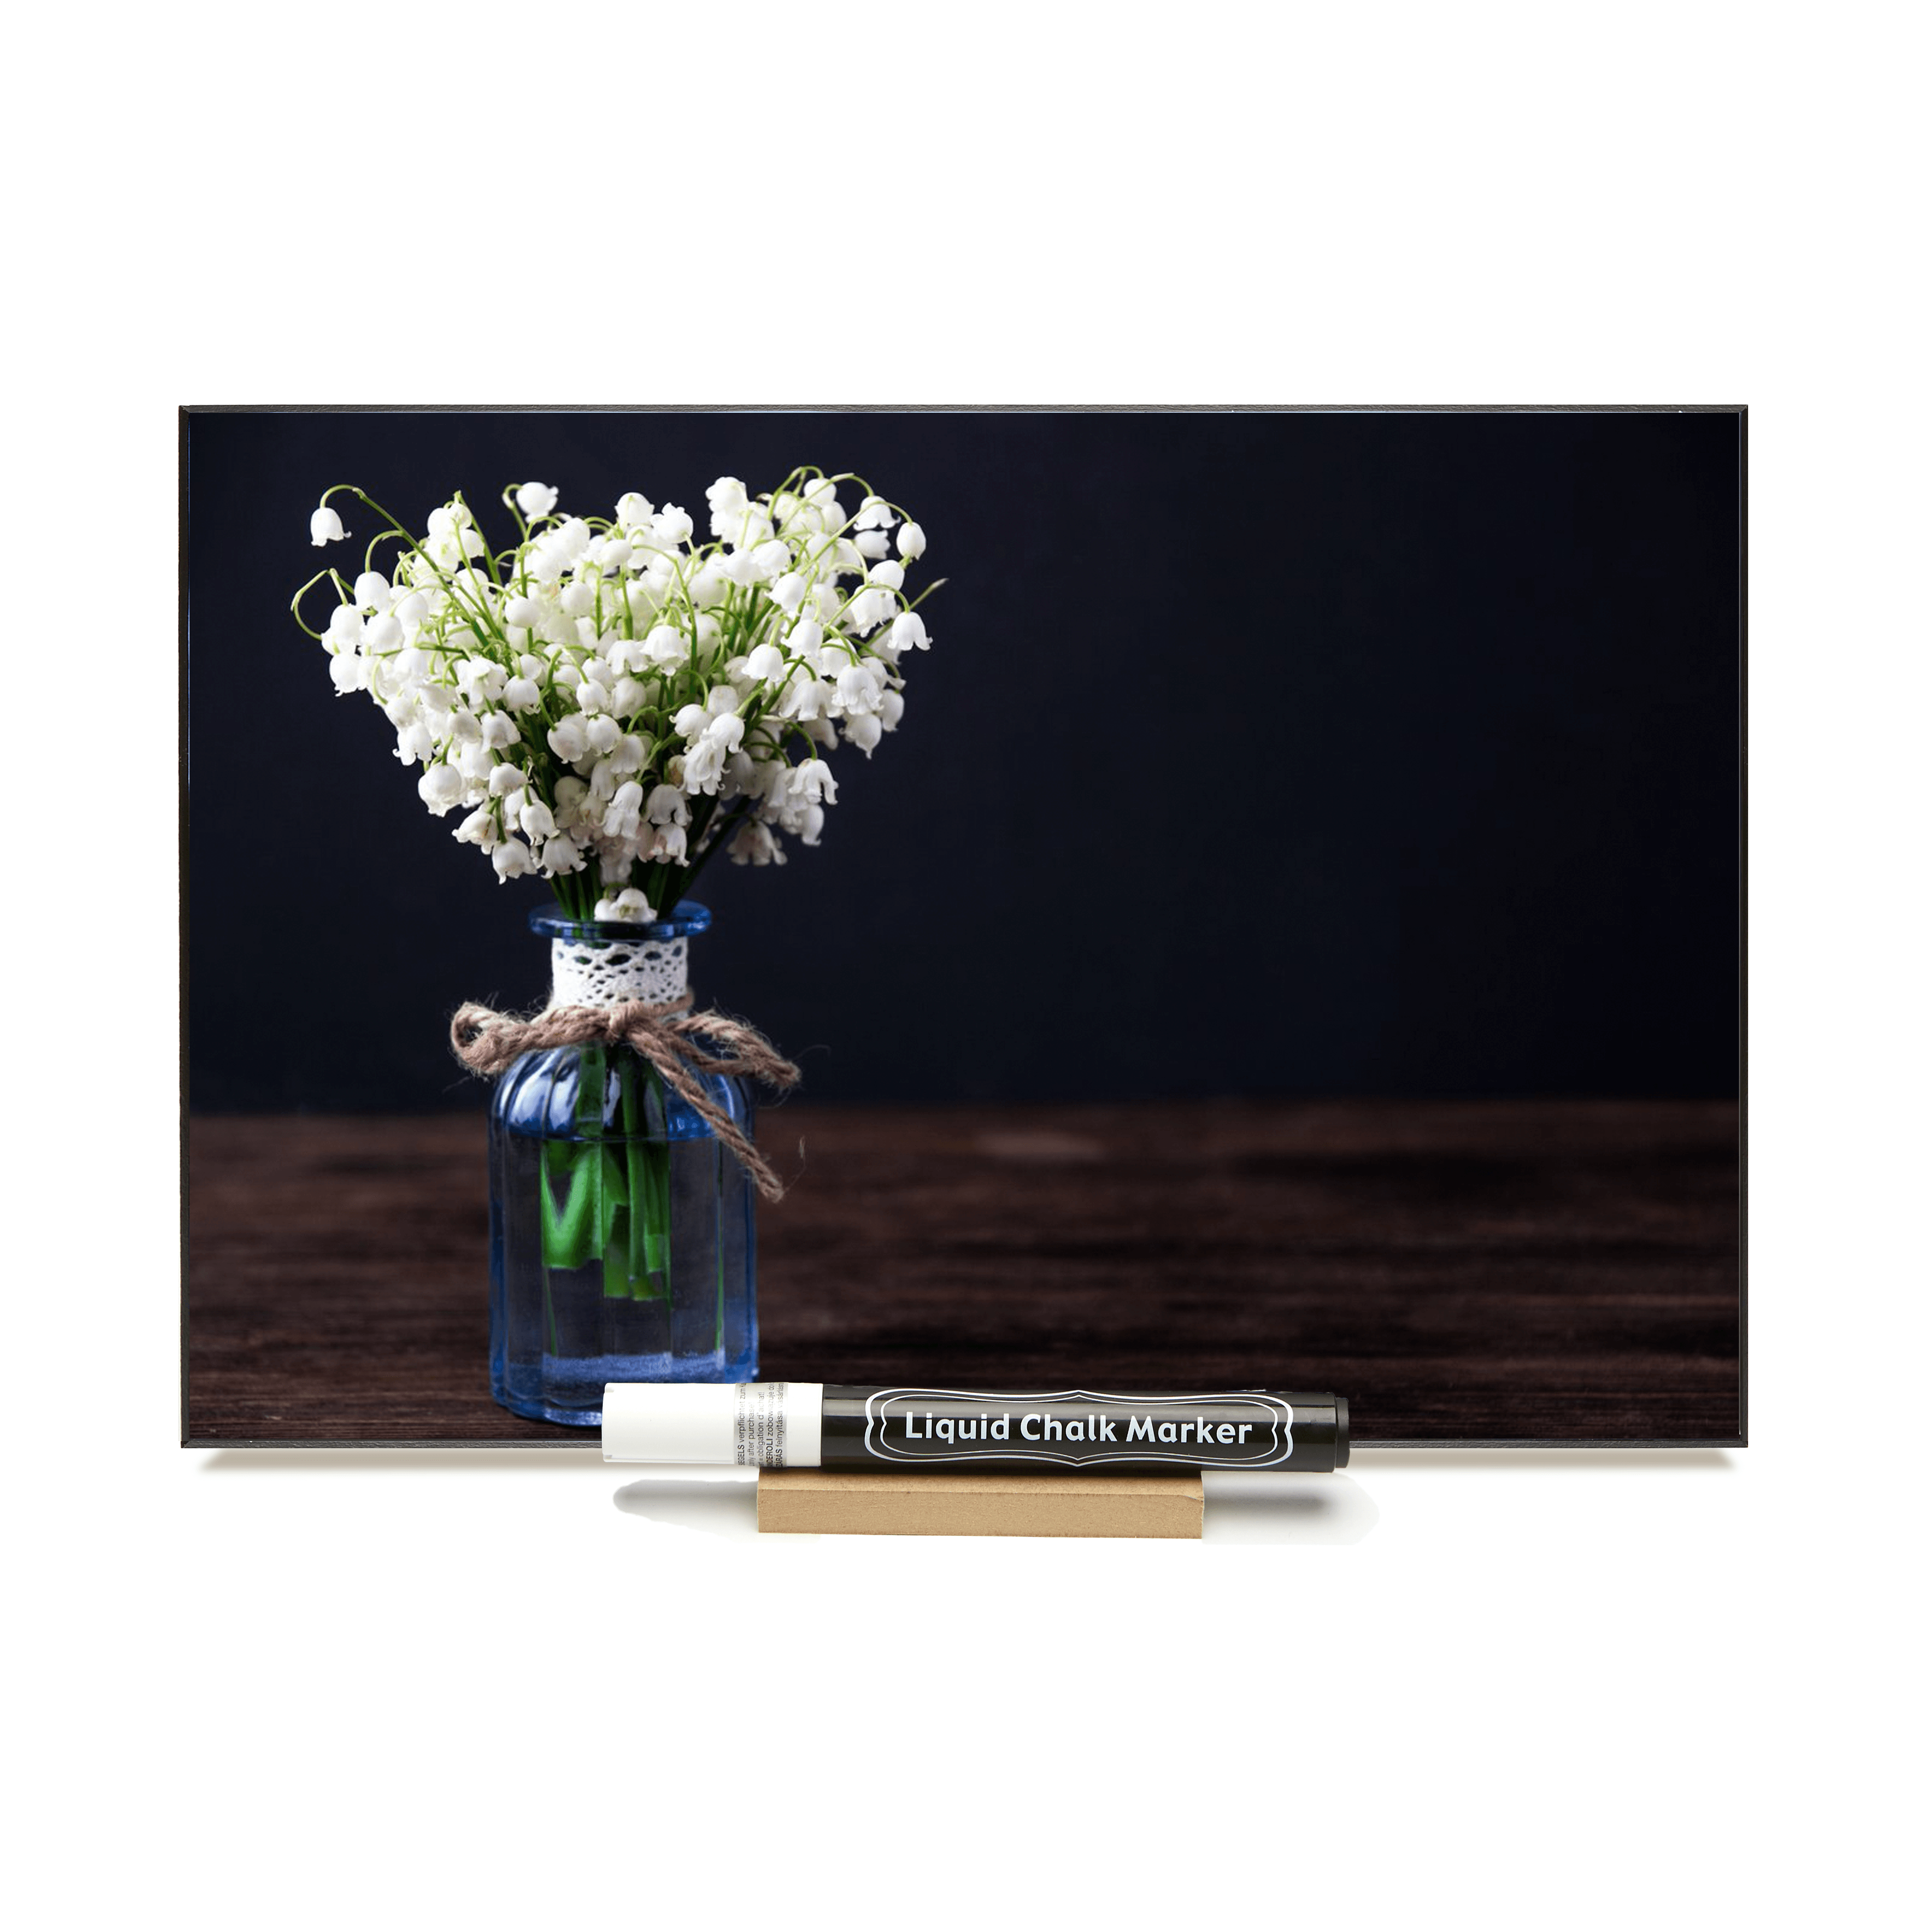 "Lily Of The Valley" PHOTO CHALKBOARDS  Includes Chalkboard, Marker & Stand